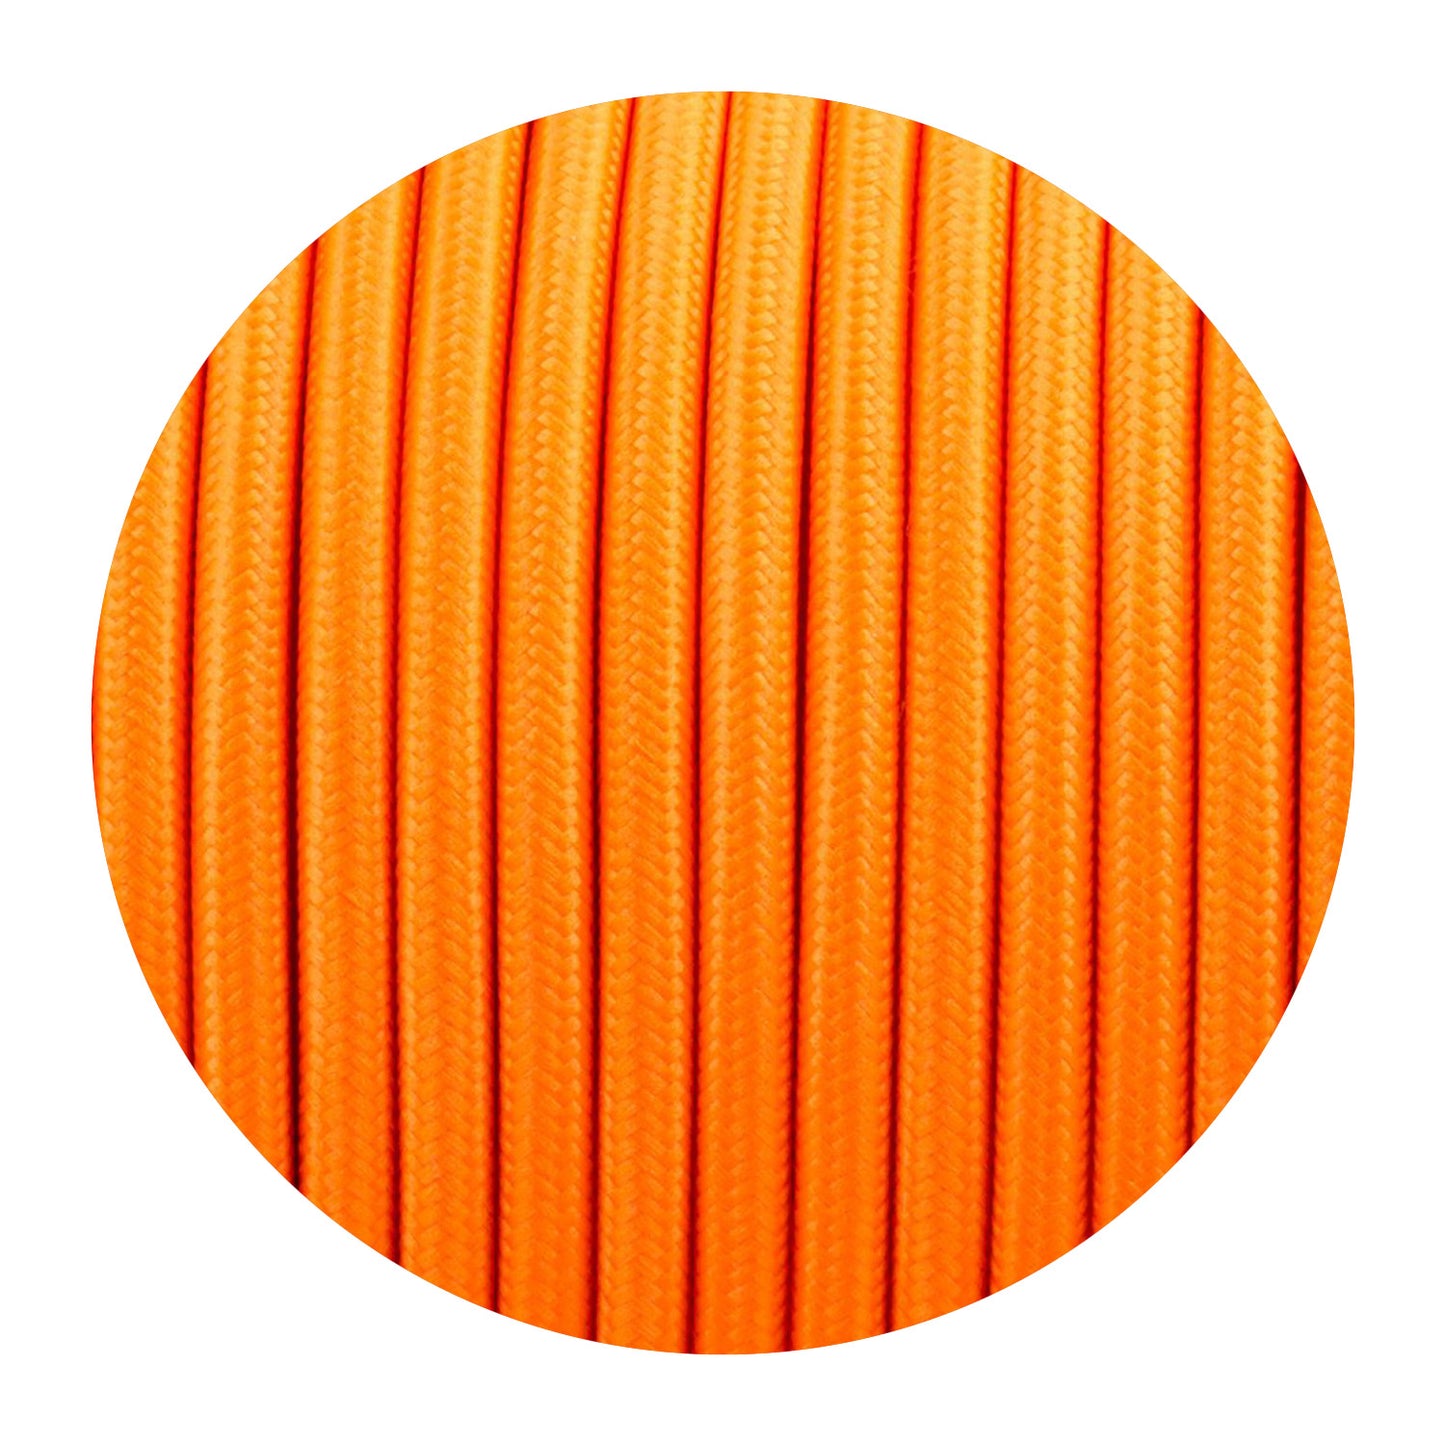 2-Core Electrical Round Cable with Orange Color fabric finish